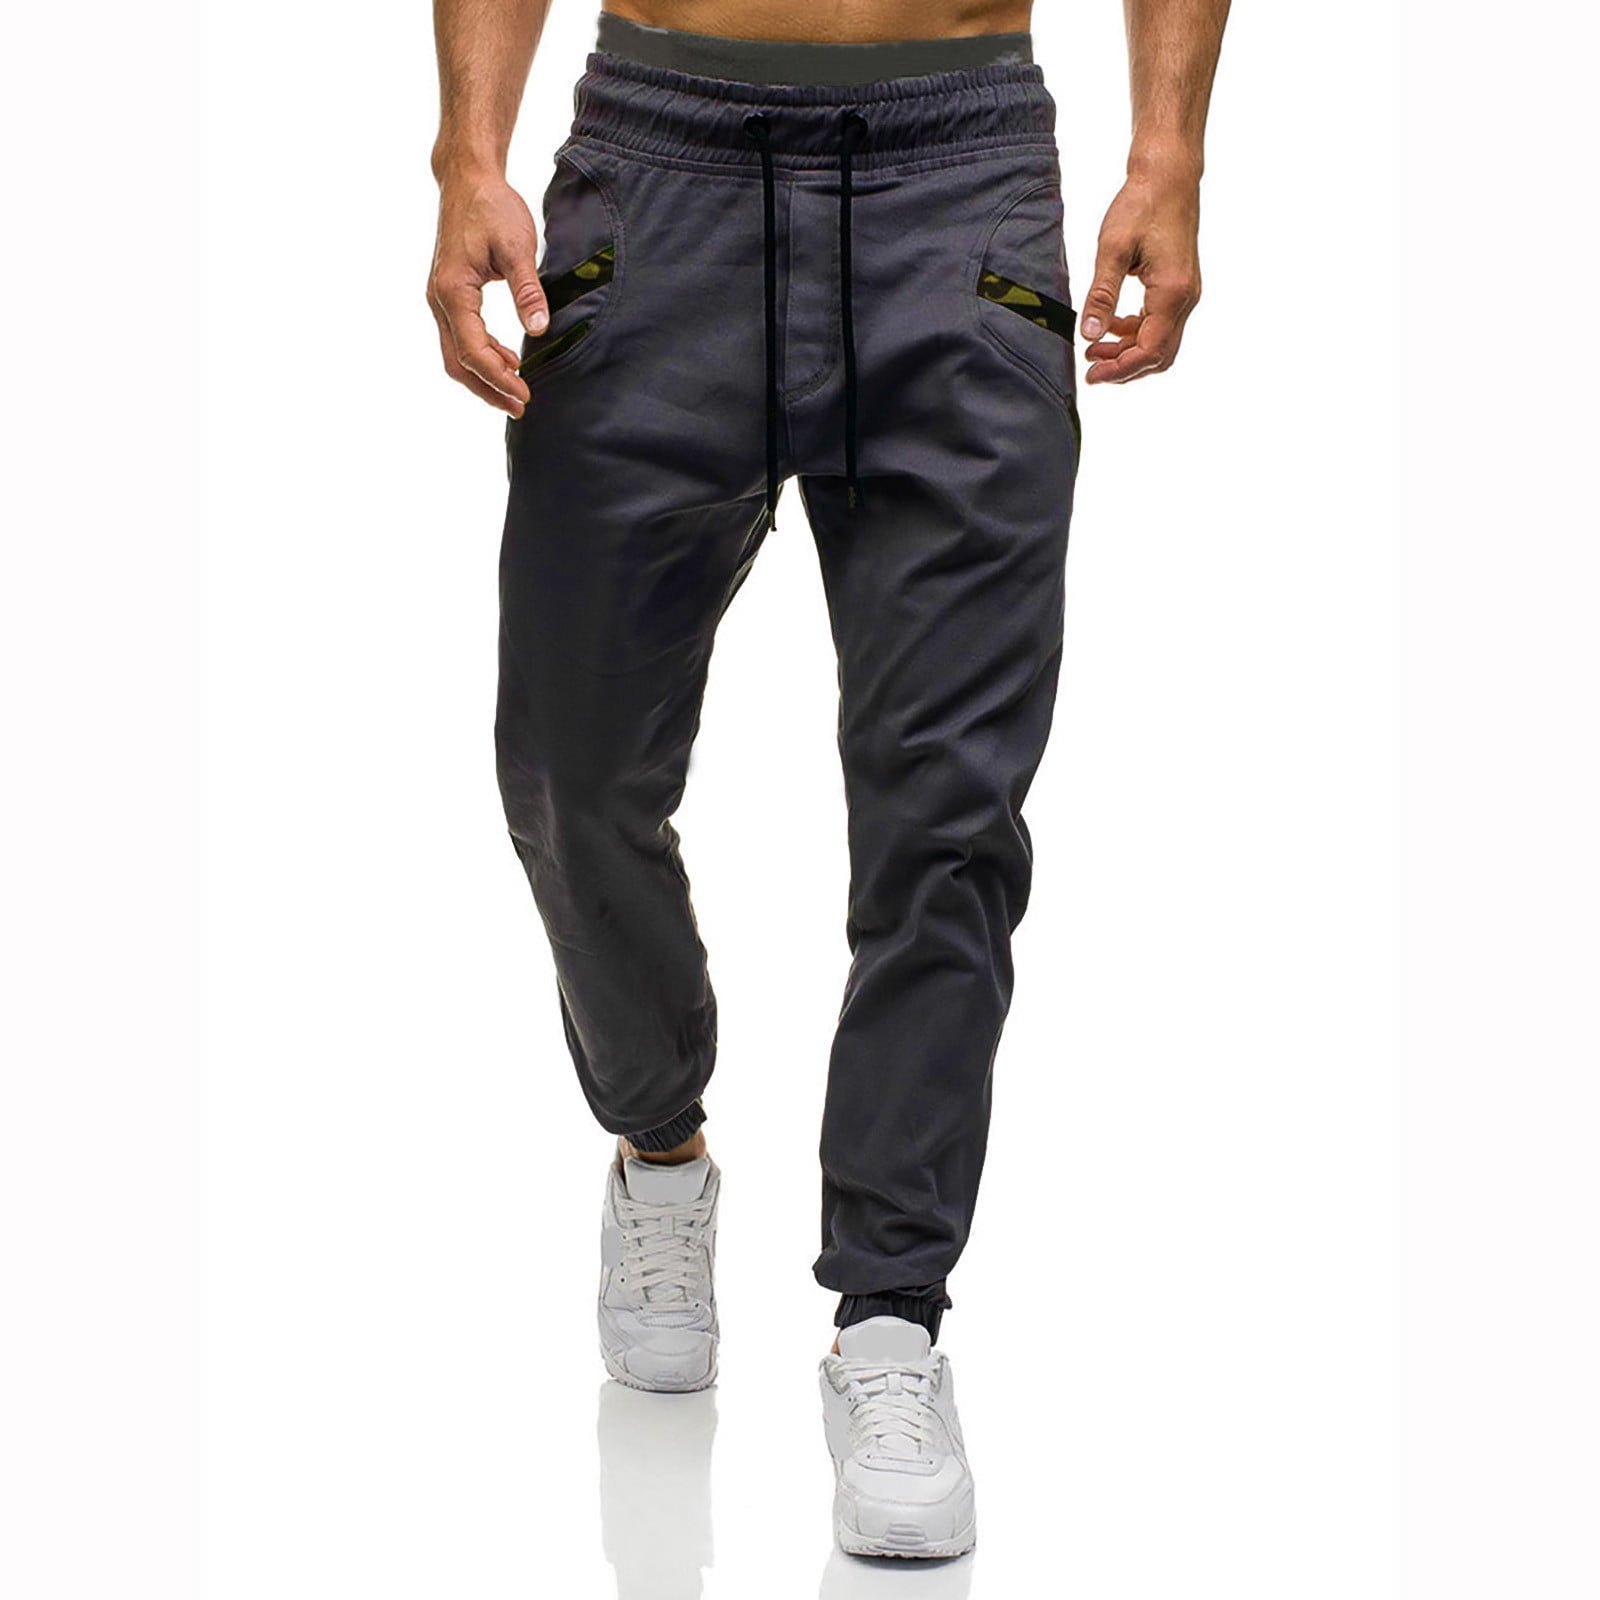 BALEAF Men's Cotton Yoga Sweatpants Open Bottom Joggers Straight Leg  Running Casual Loose Fit Athletic Pants With Pockets Black L